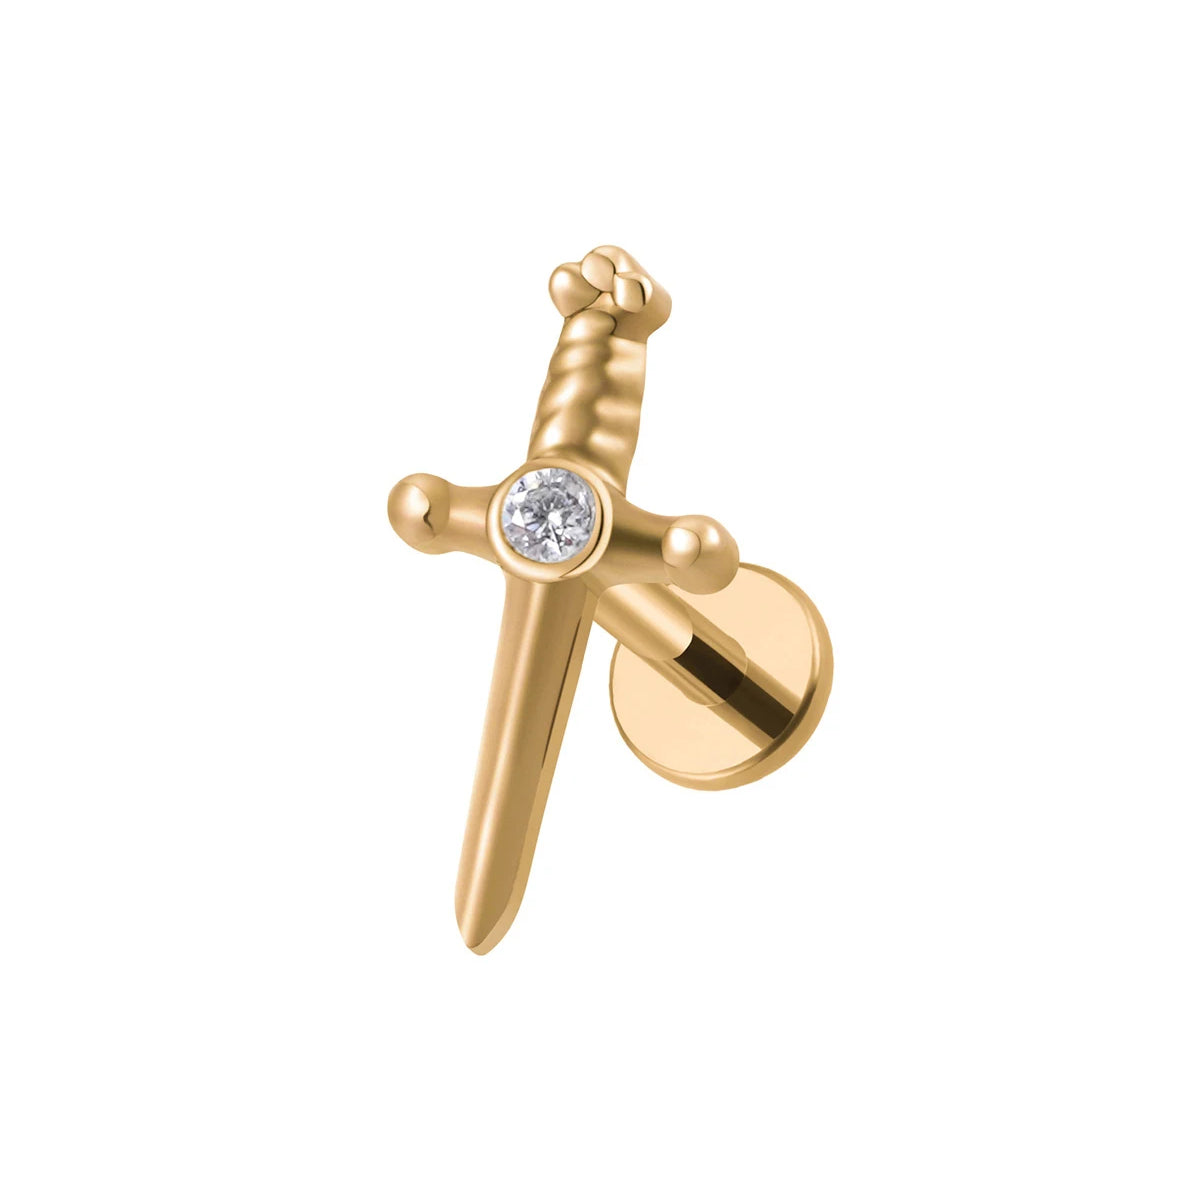 Dagger earring stud with a cz stone titanium gold and silver labret piercing 16G internally threaded sword ear stud